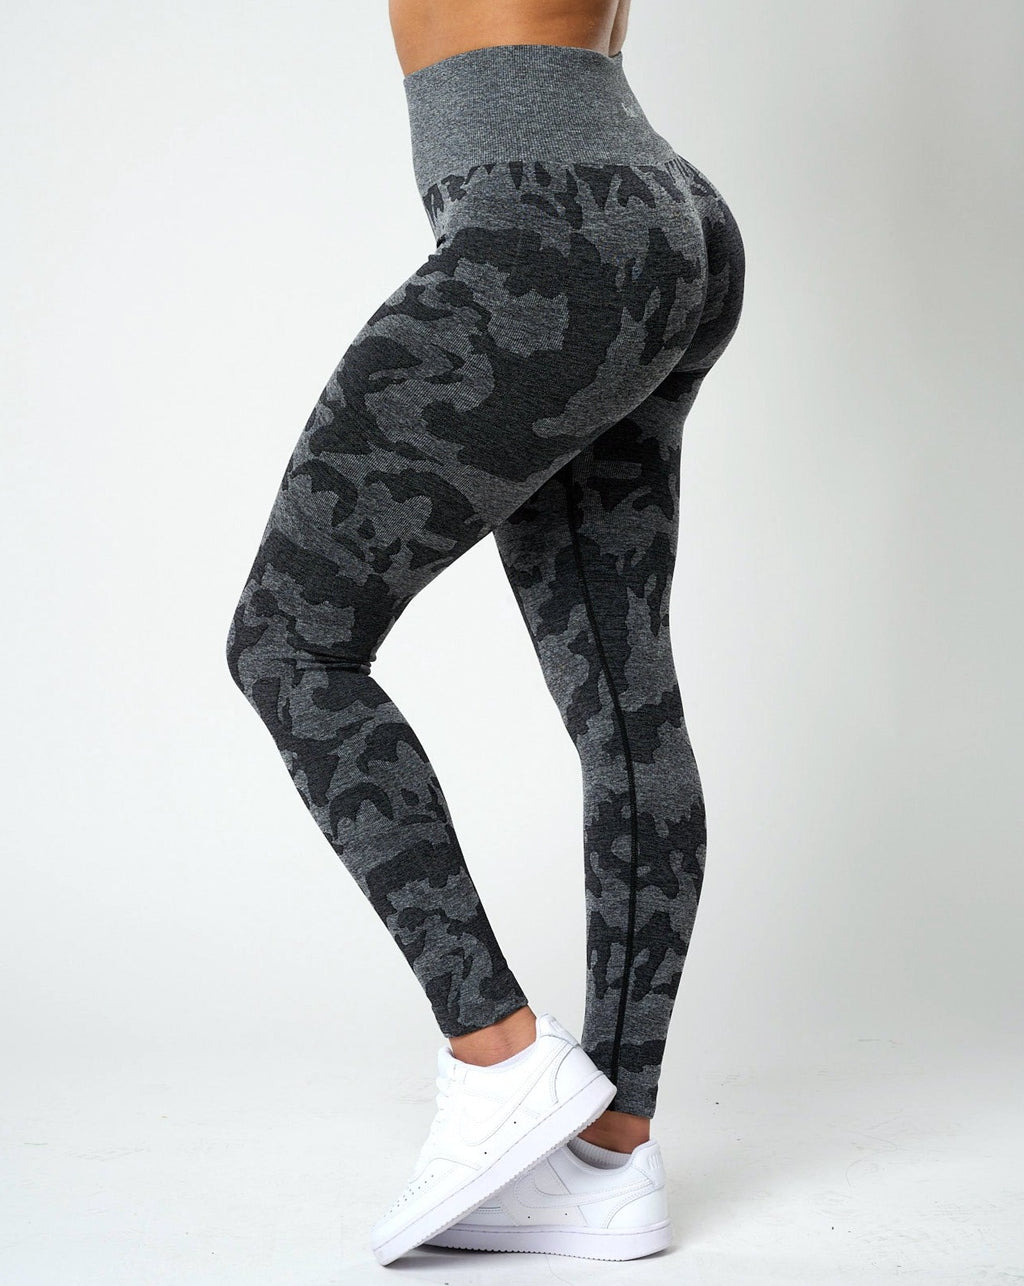 Yogalicious Lux Grey Camo Leggings Womens Size XS Grey and White Yoga Pants